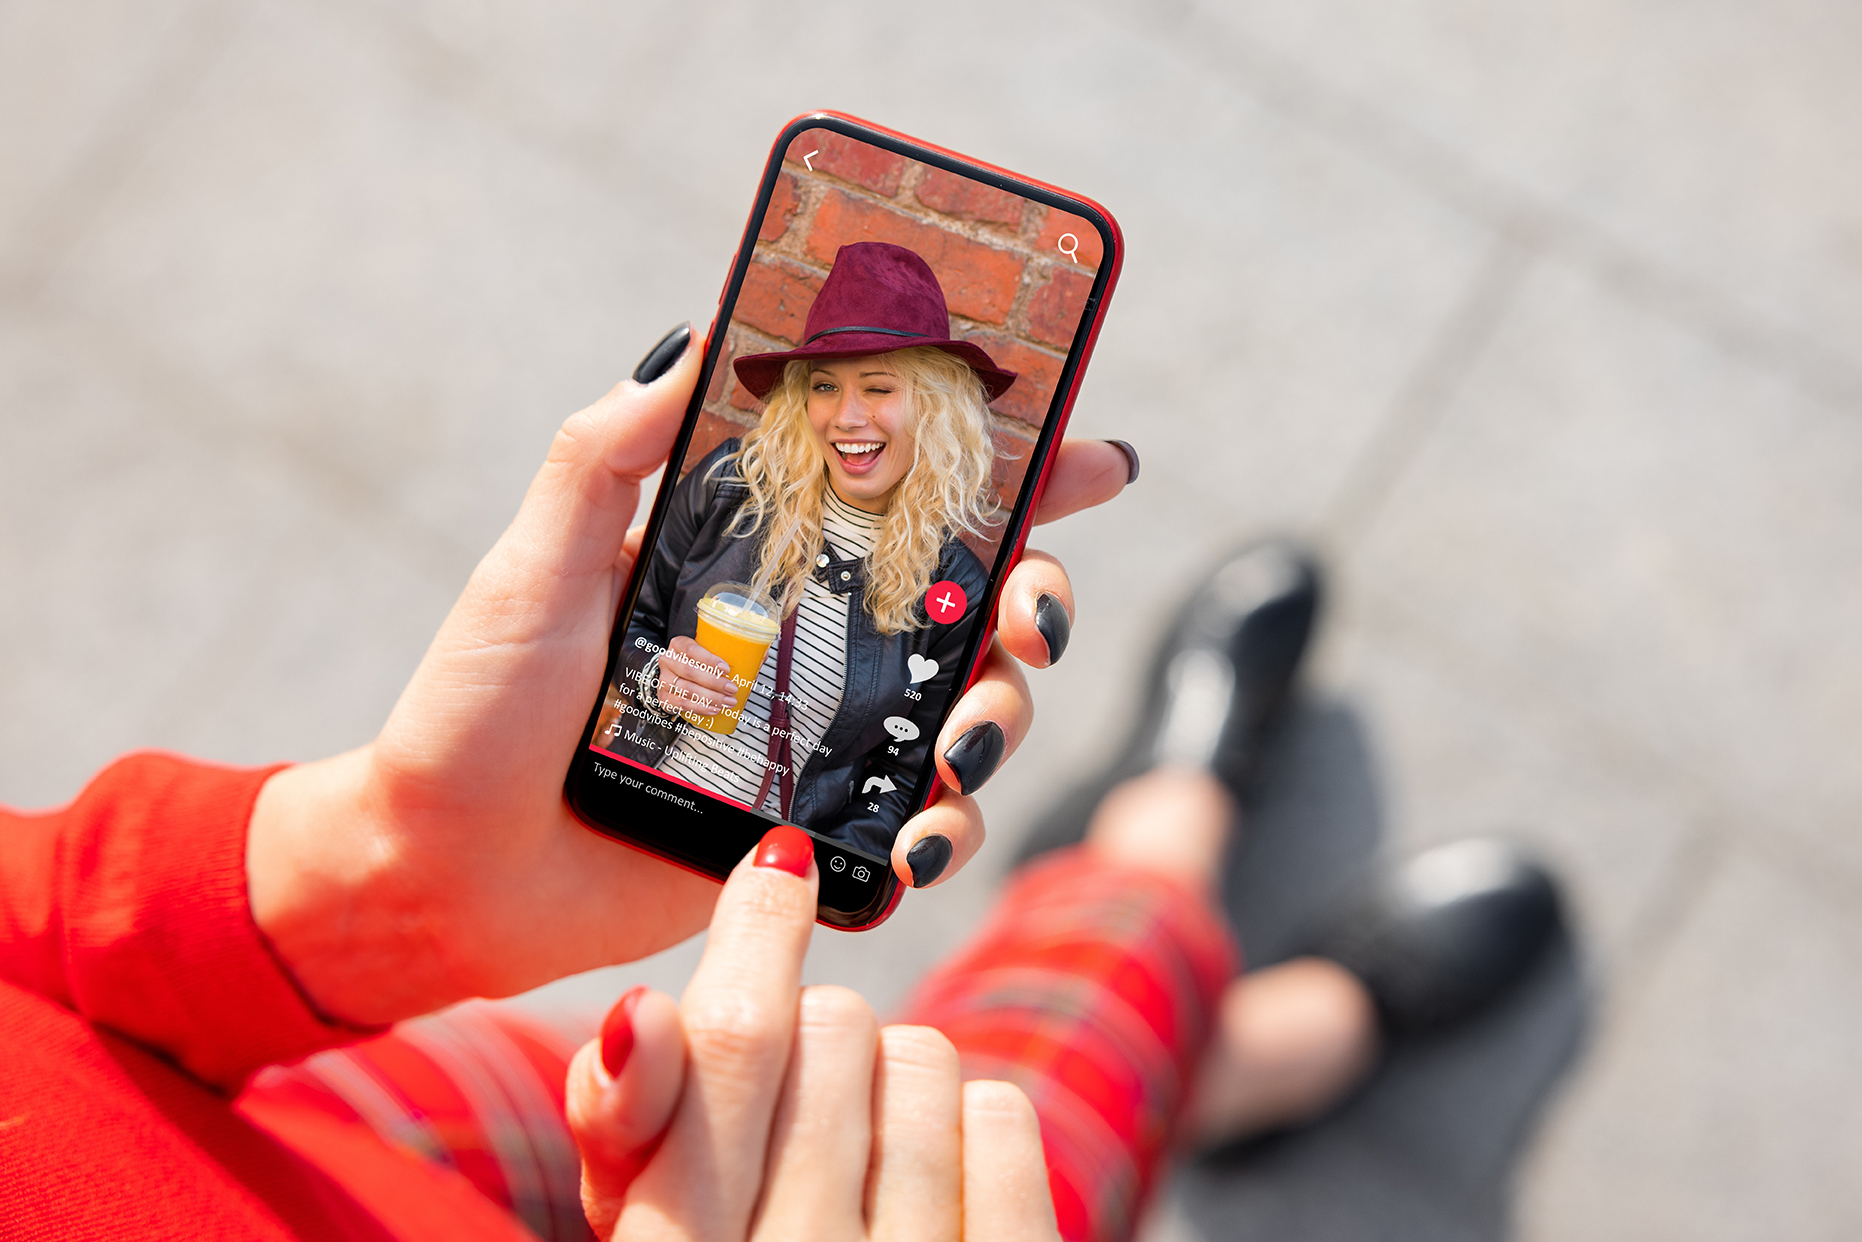 TikTok marketing: The complete guide for brands in 2022